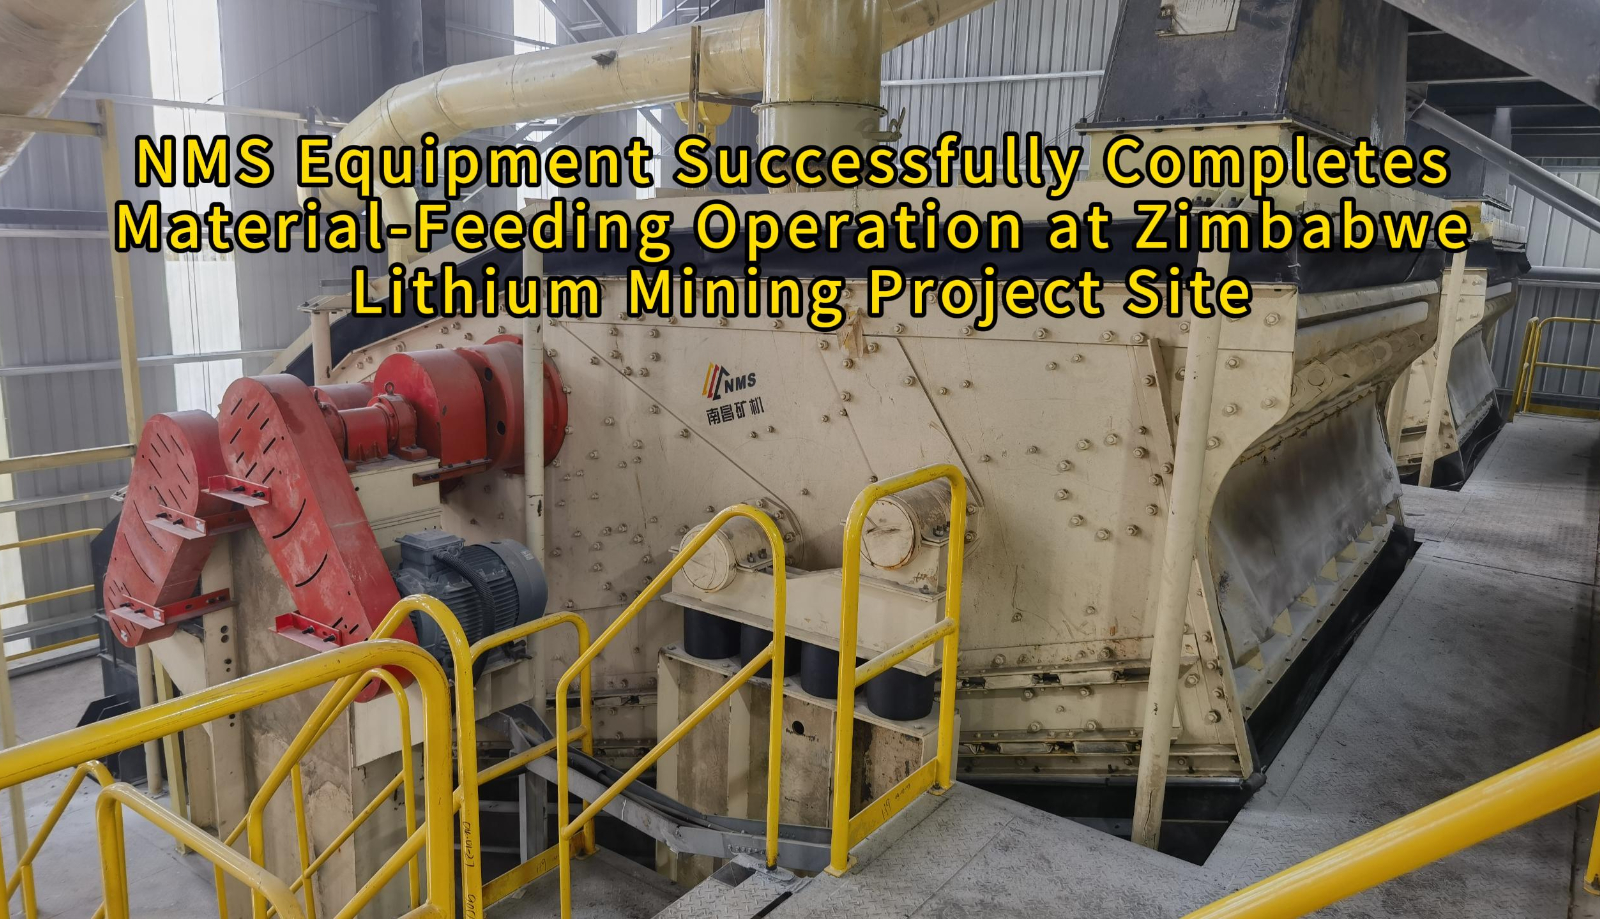 NMS Equipment Successfully Completes Material-Feeding Operation at Zimbabwe Lithium Mining Project Site